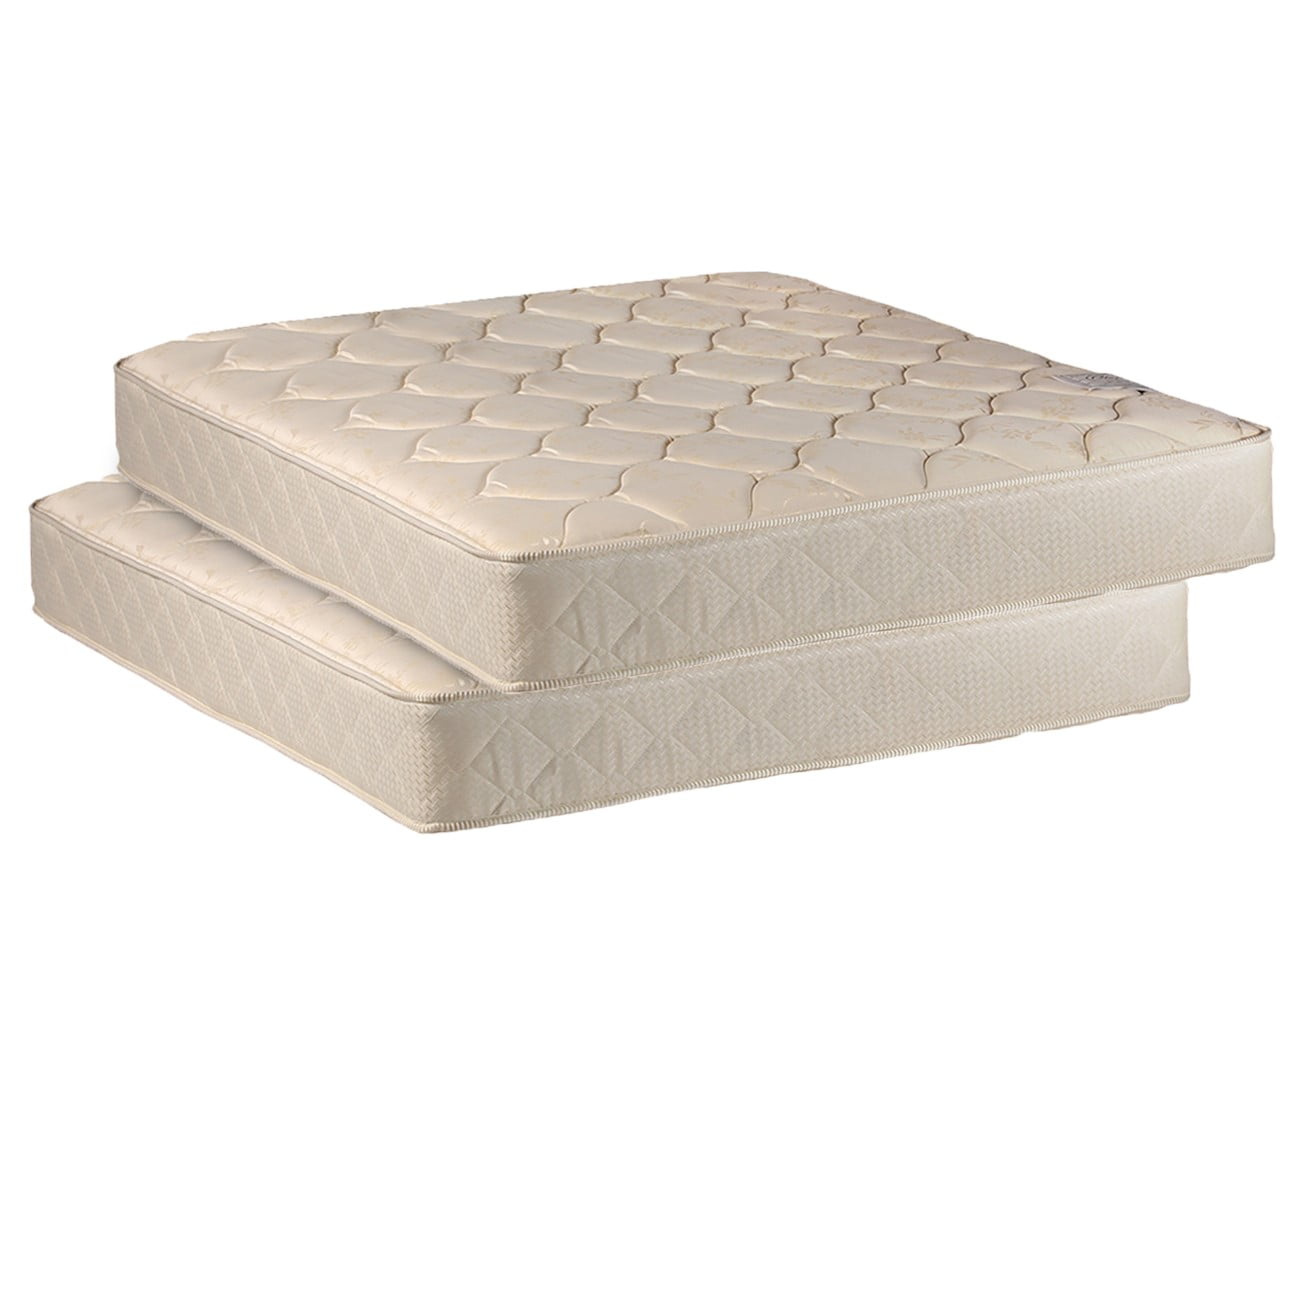 Two Twin Mattresses Package For Bunk, Is A Bunk Bed Mattress The Same Size As Twin